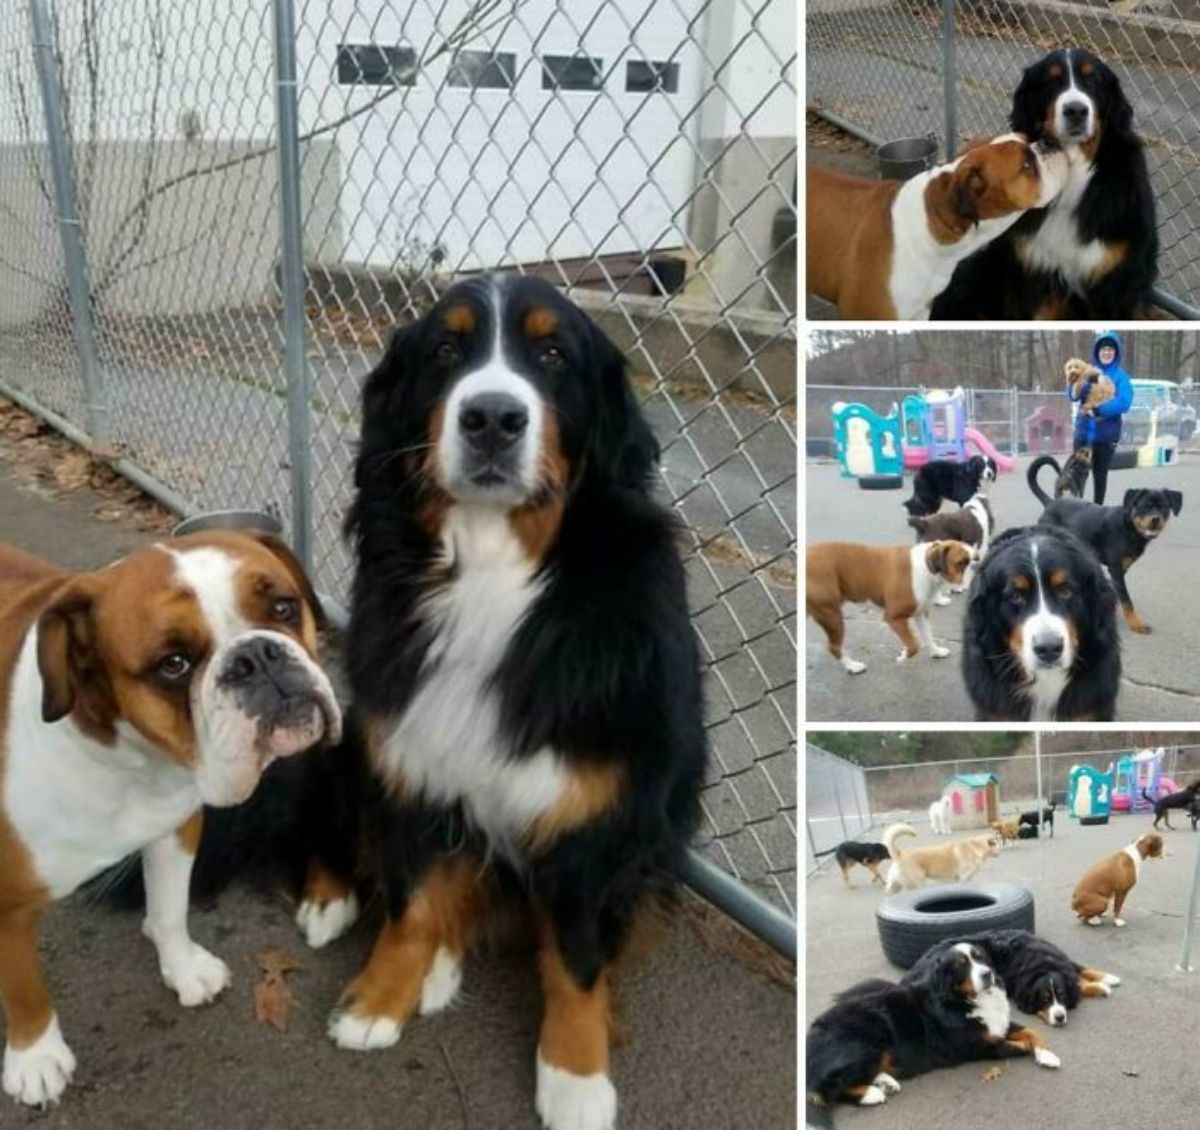 4 photos of a brown and white dog following a fluffy black white and brown bernese mountain dog around